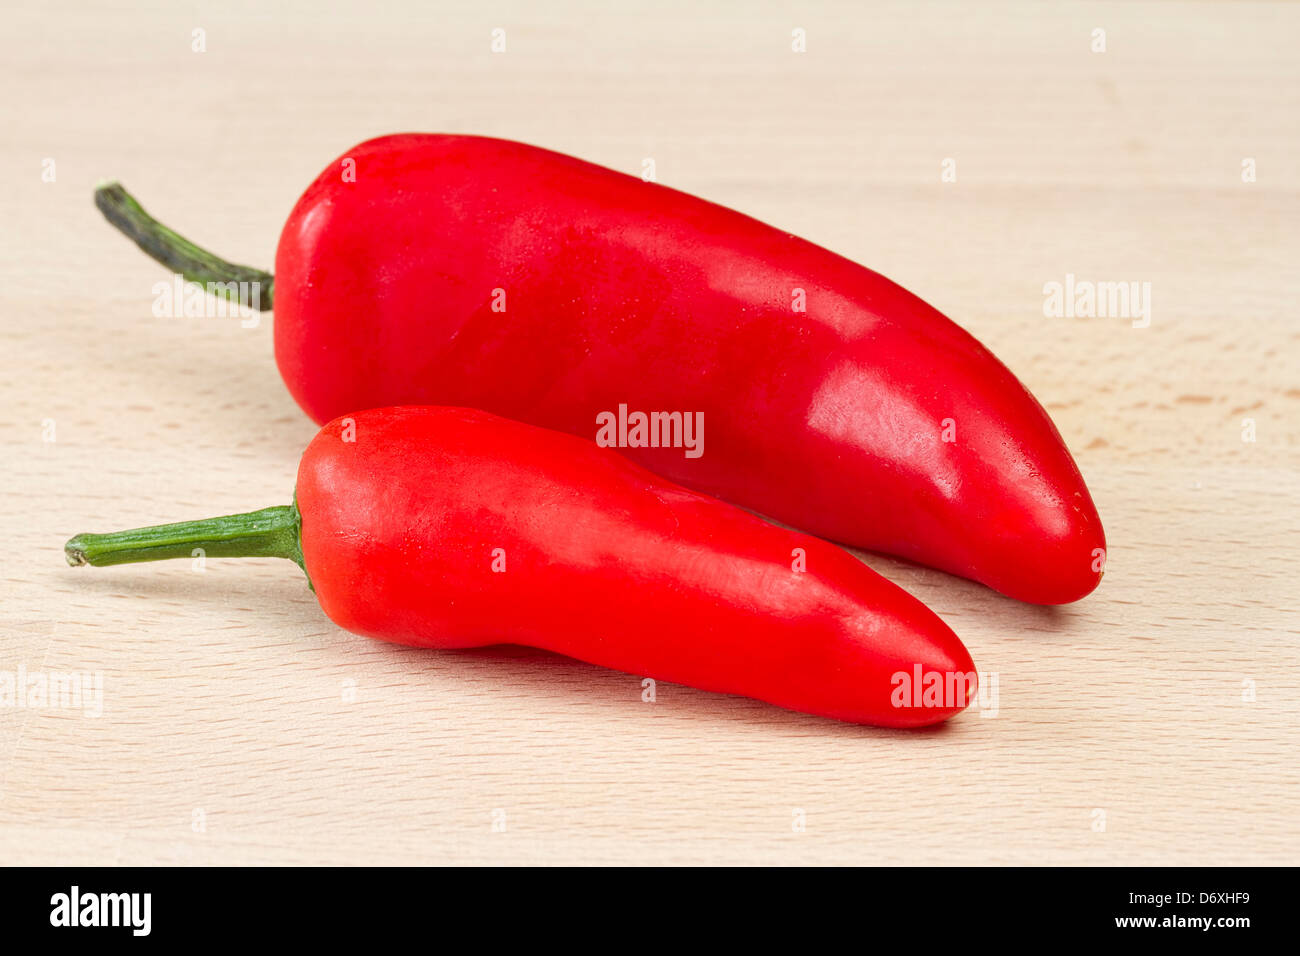 Two red chillis on wooden chopping board Stock Photo